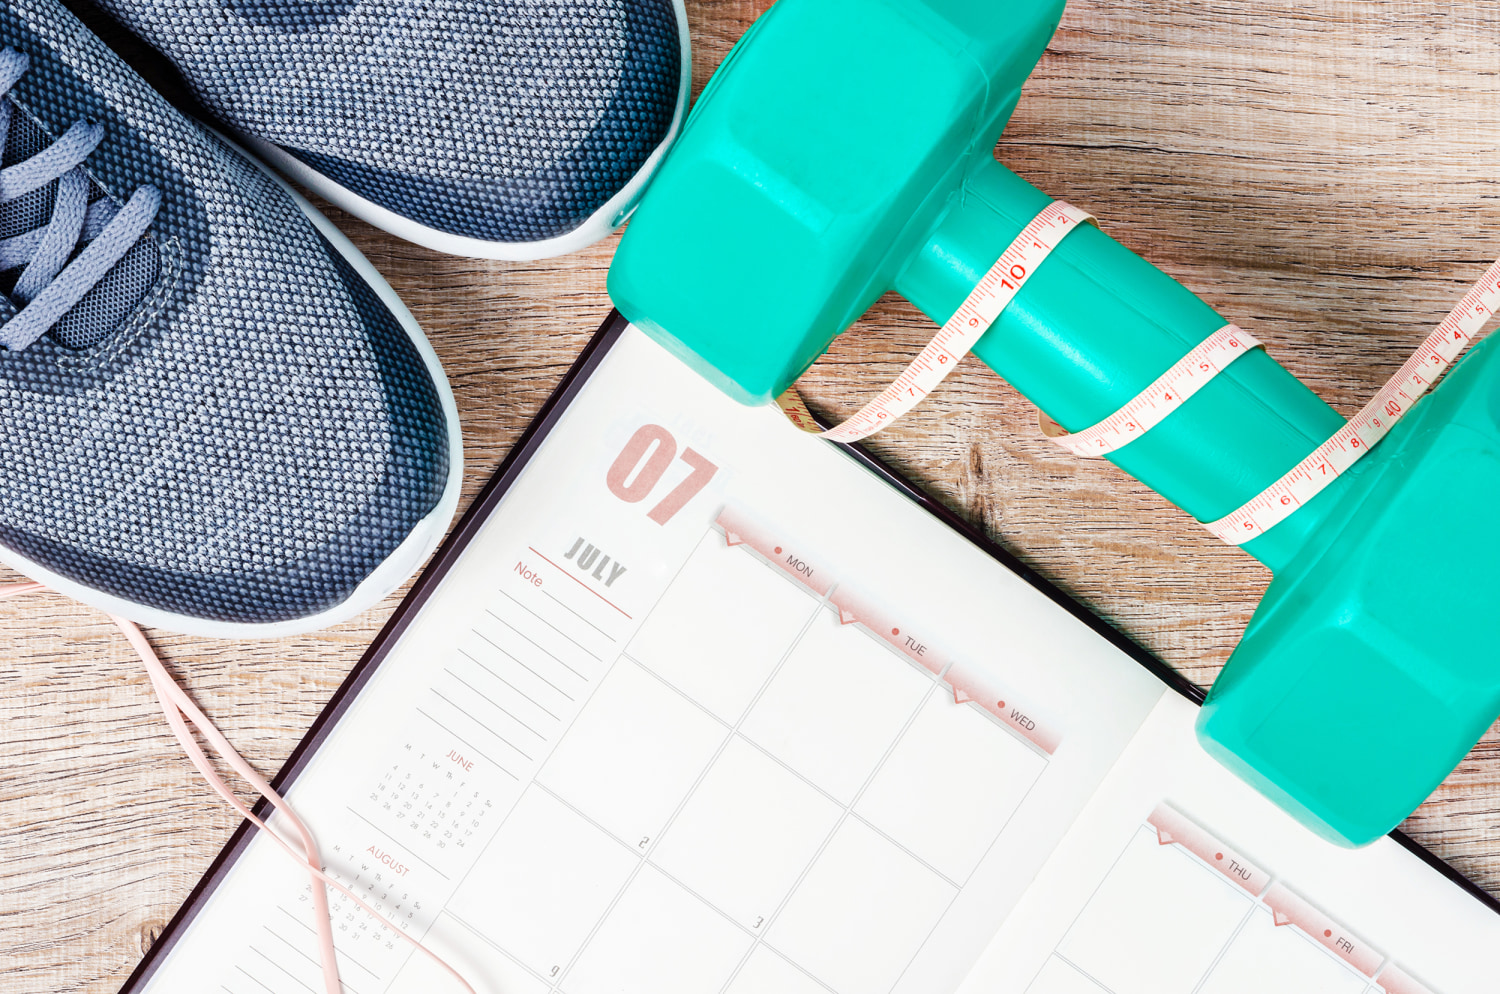 Weekly Workout Plan: What is the Best Workout Schedule?